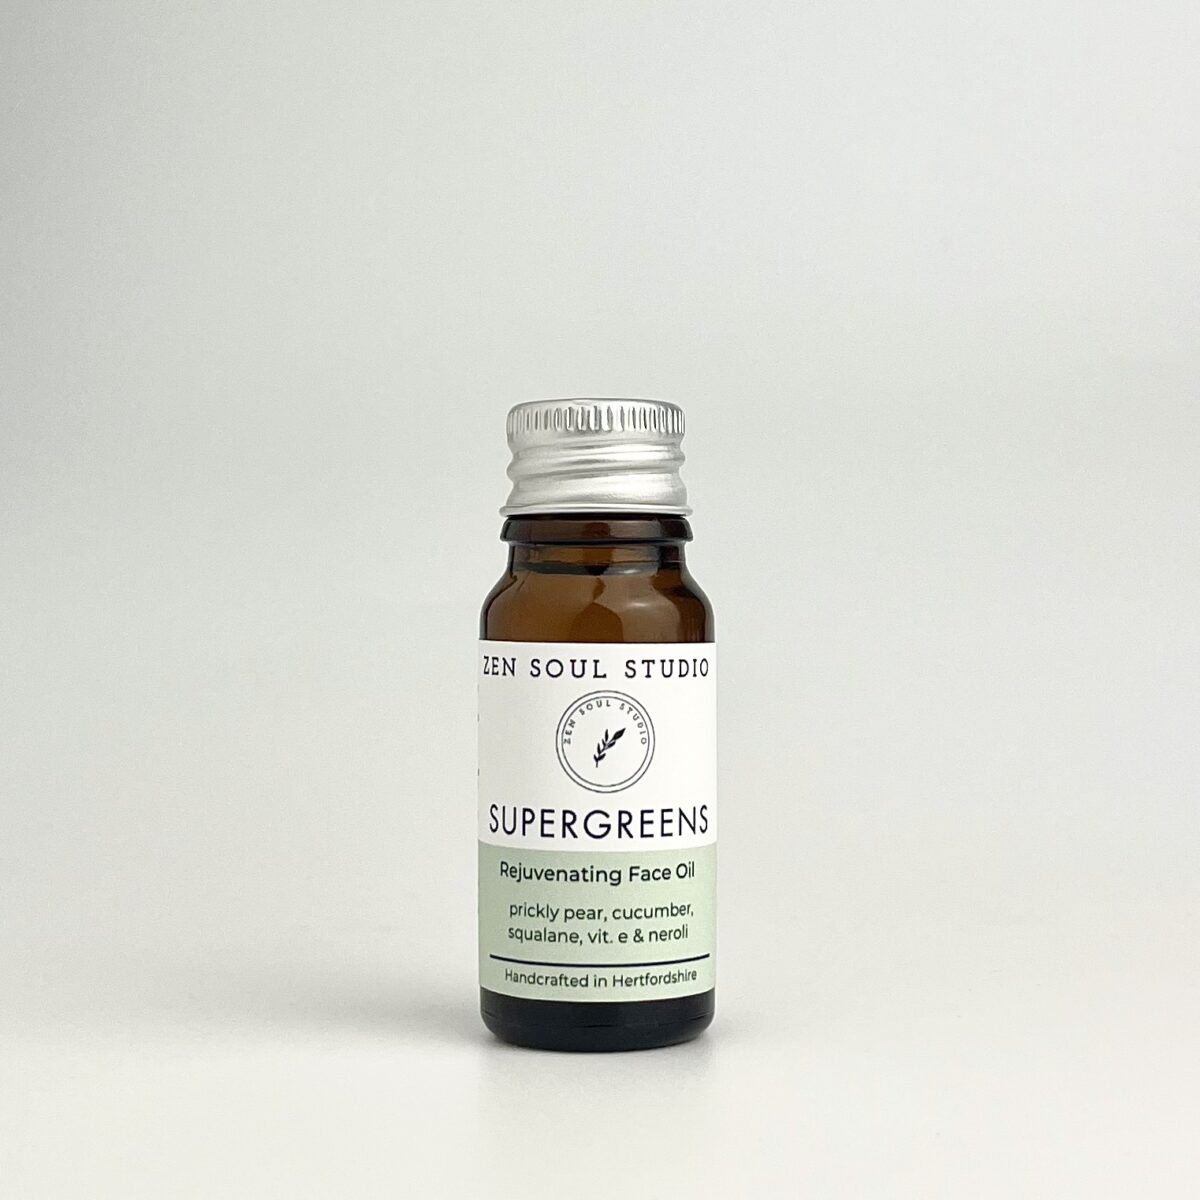 Supergreens Purifying mini face oil with Neroli